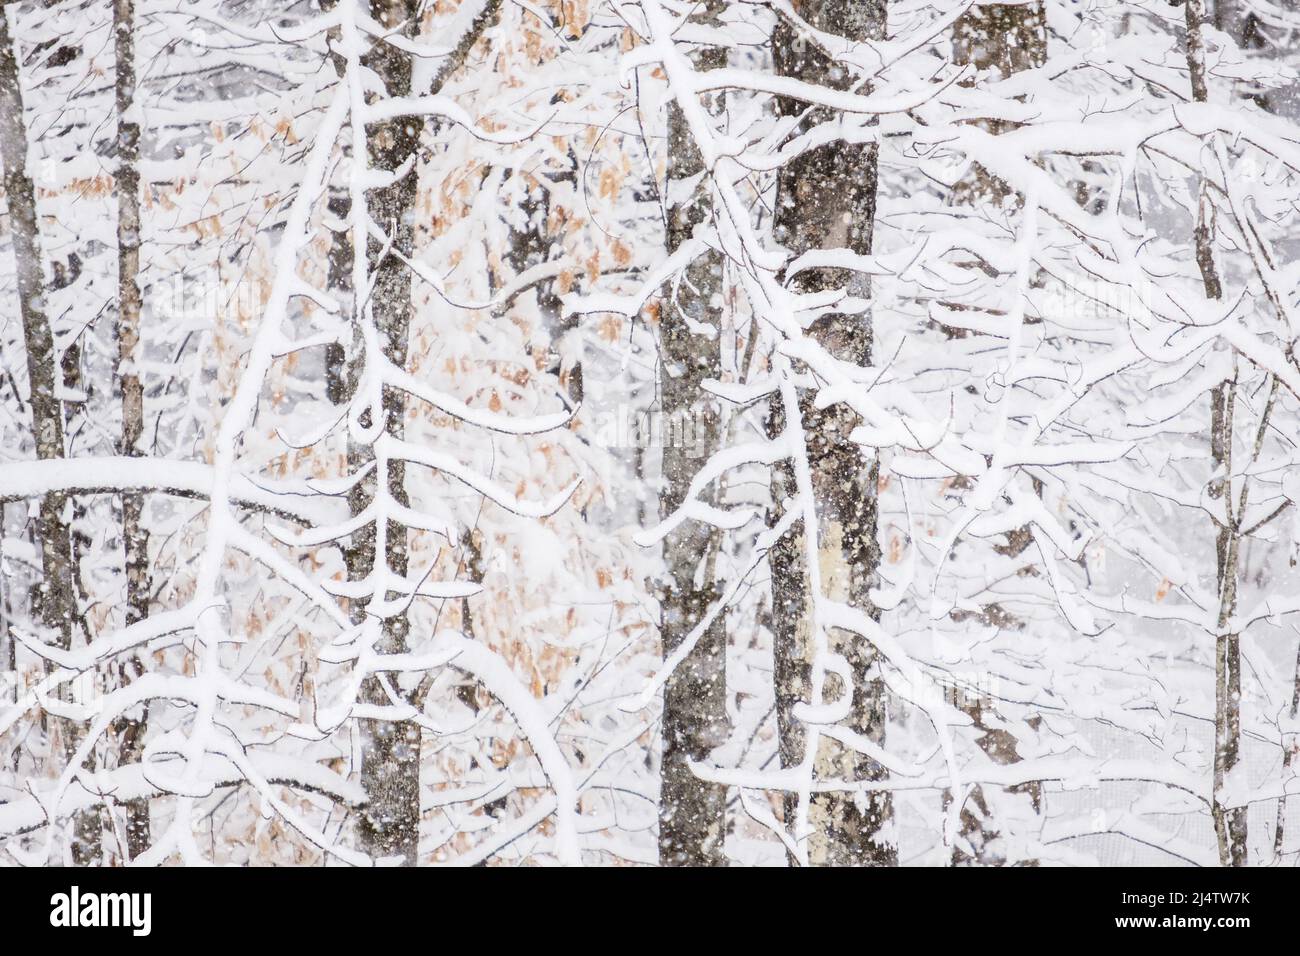 New-fallen snowy during a snowstorm in Vermont, New England, USA. Stock Photo